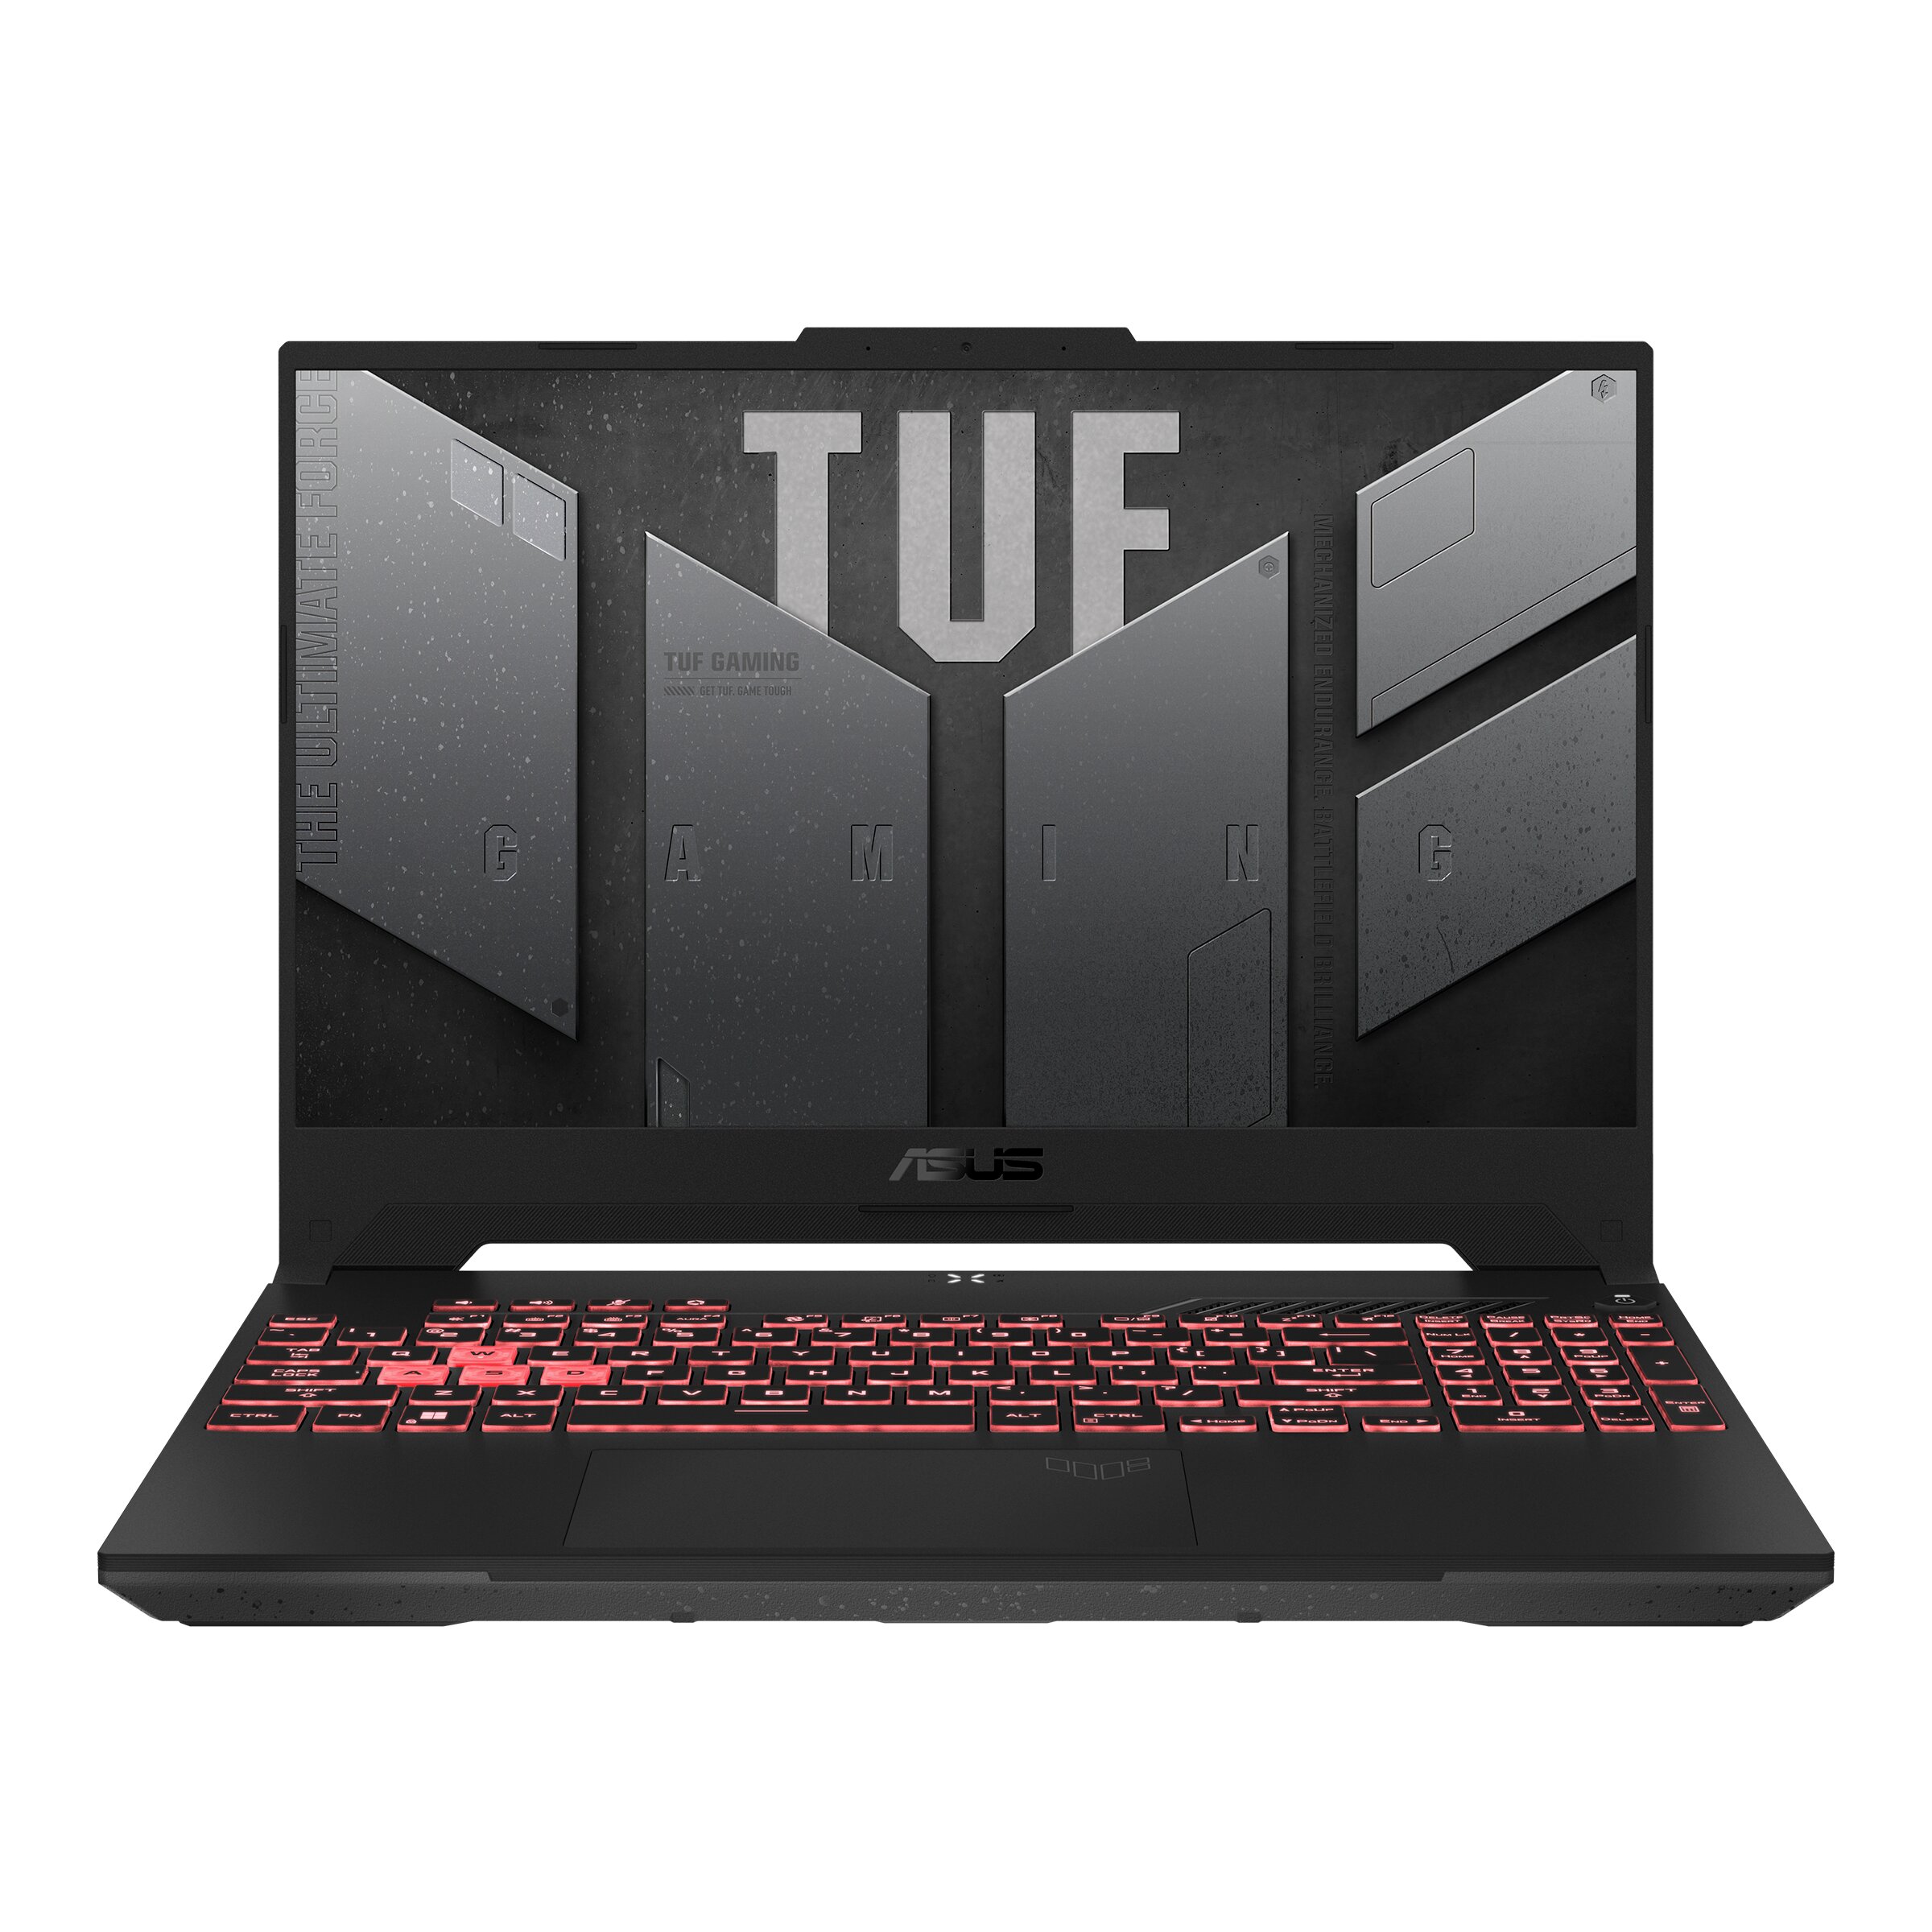 NOTEBOOK ASUS GAMING FA507RC-HN007W AMD RYZEN R7-6800H 3.2GHz UP TO 4.7GHz 20M 16G 512SSD VGA NVIDIA 4G RTX3050 GDDR6 15.6 WIN11 GRAY ,Laptop Pc